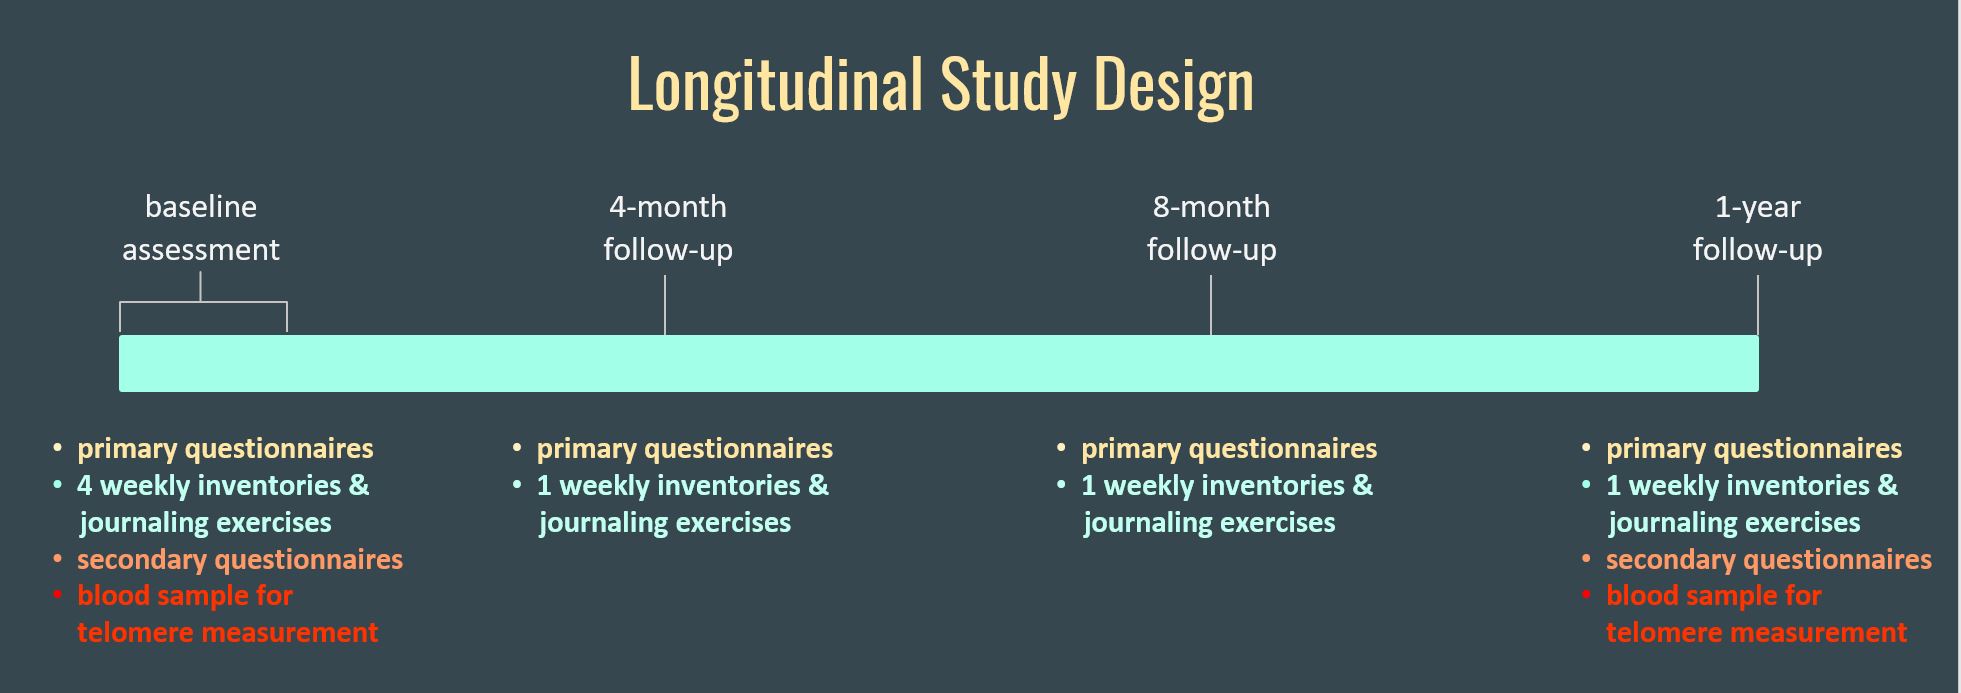 The Longitudinal Study Design shows a timeline of the study, with the 4 study time points plotted from left to right: baseline assessment,  4-month follow-up, 8-month follow-up, and 1-year follow-up. Under each time point is a list of tasks completed at that assessment. 